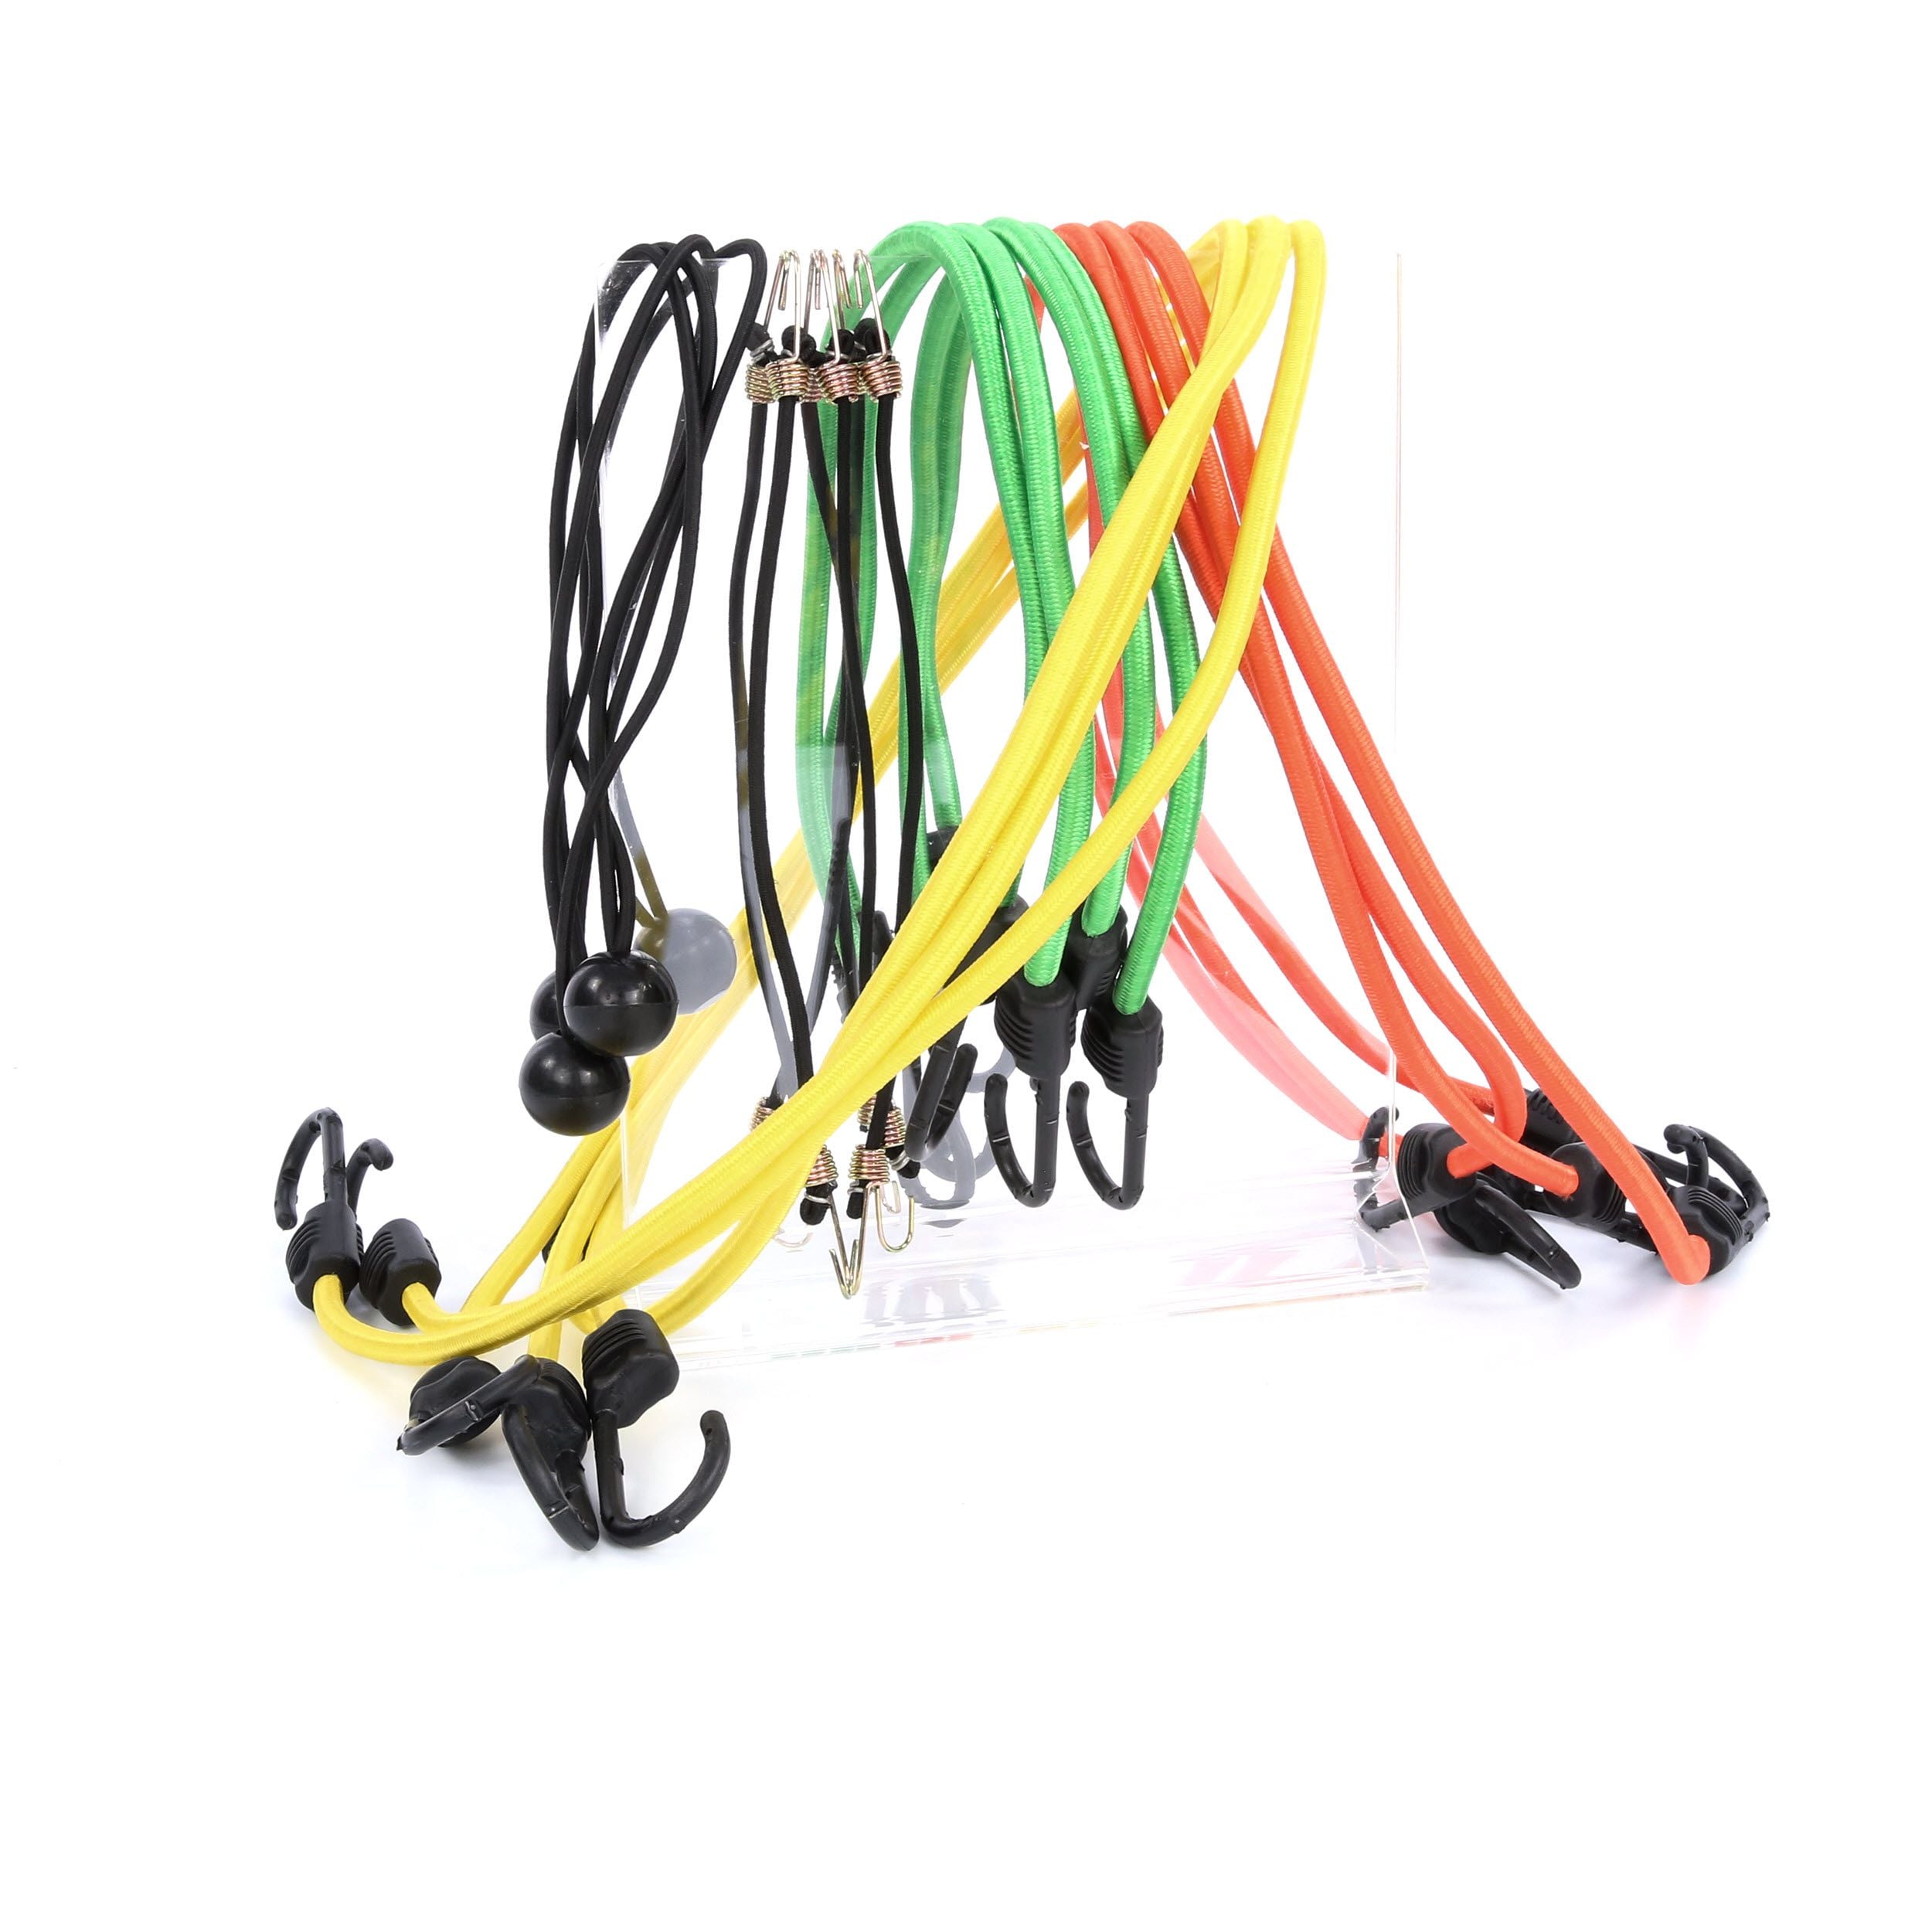 Details about   10pc Bungee Cords Wires with Hooks Cables Straps Bungie Elastic Rope Tie 25cm 